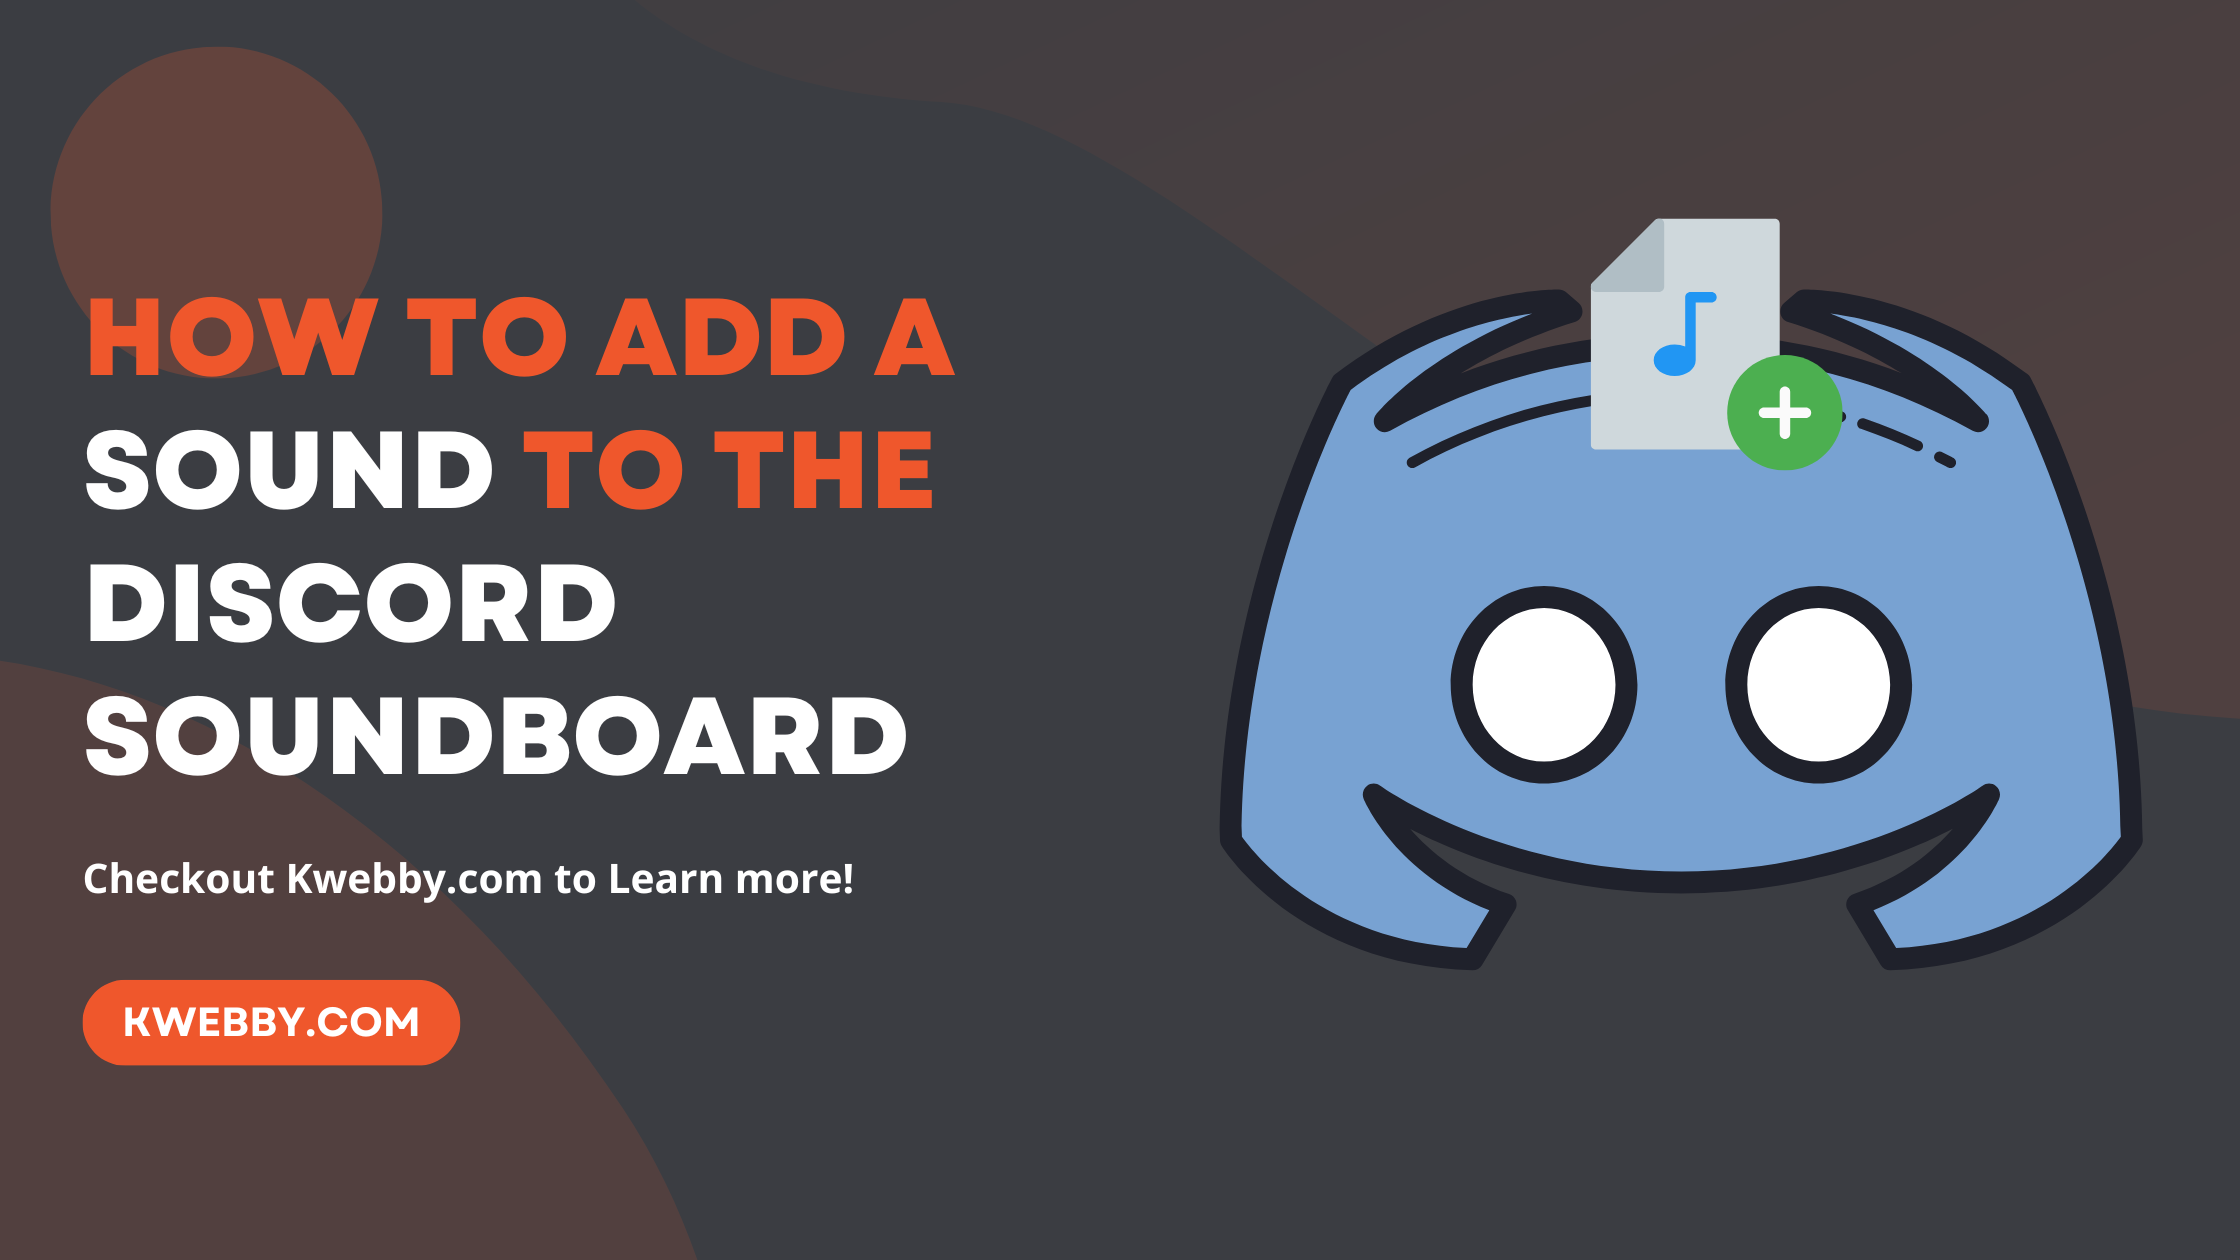 How to add a sound to the discord soundboard in 2 Clicks